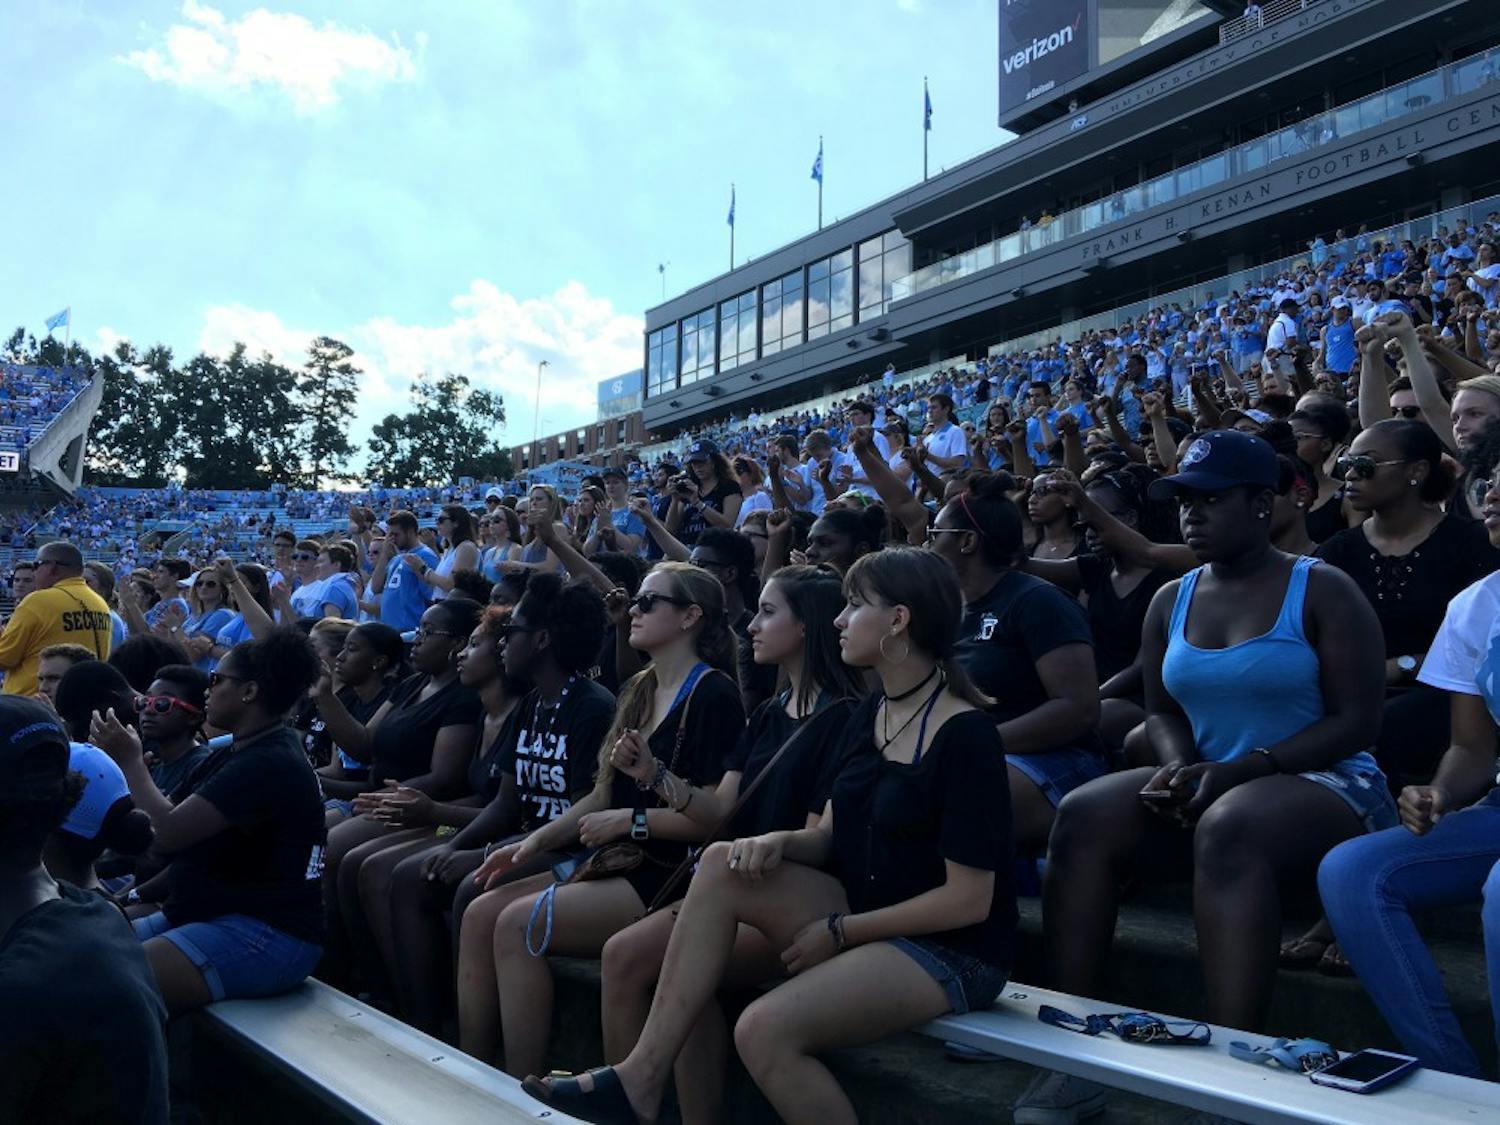 While "The Star-Spangled Banner" played in Kenan Stadium Saturday, protestors remained seated and raised their fists.